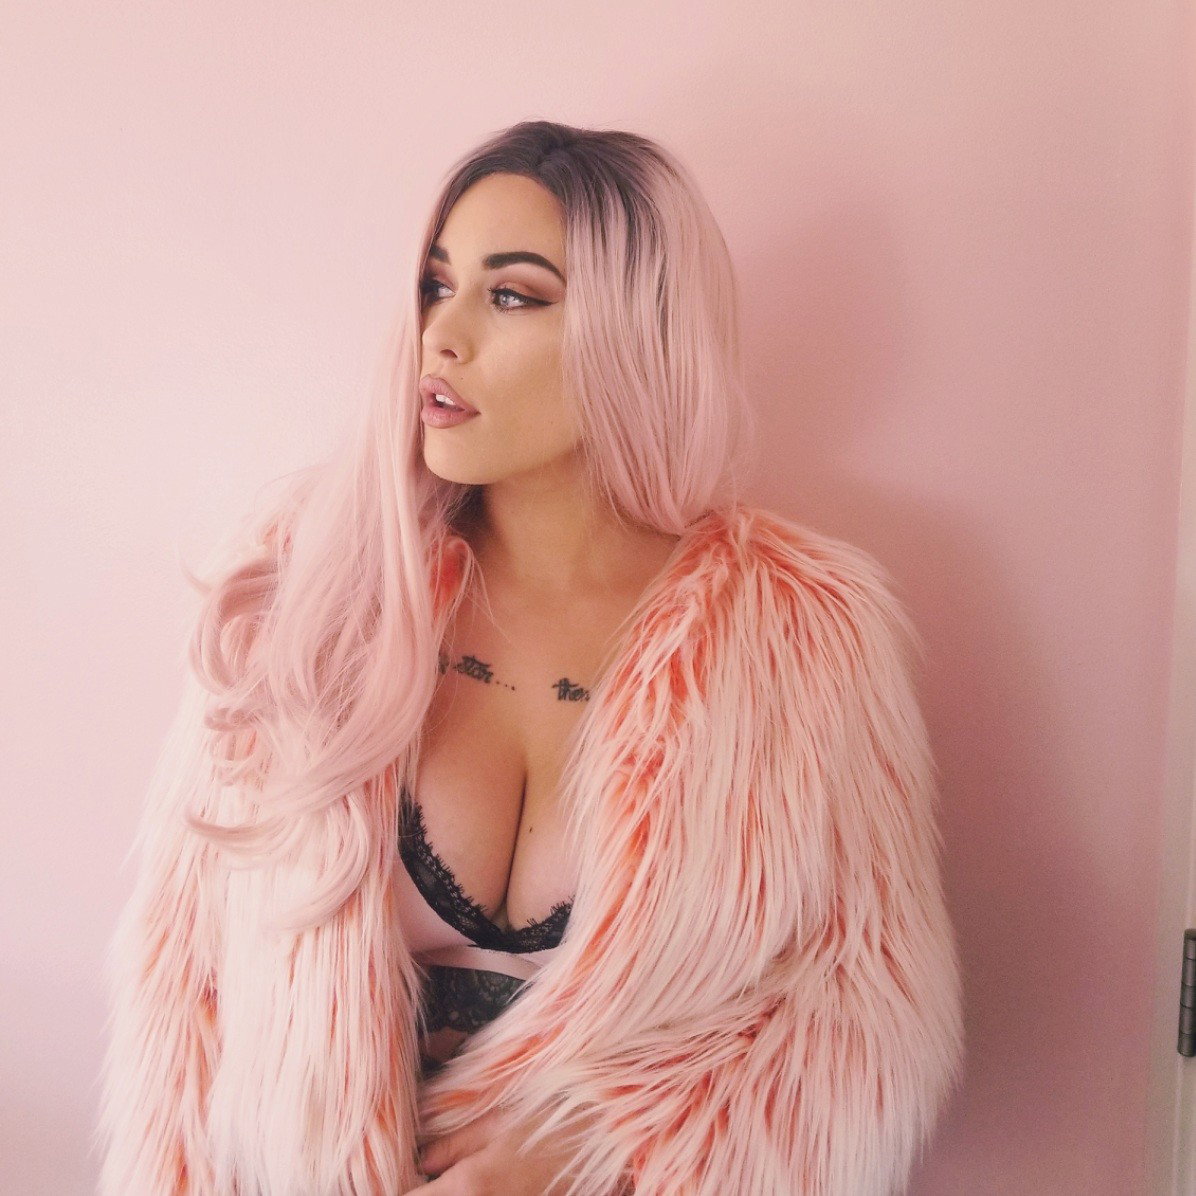 Photo by TrophyWomen with the username @TrophyWomen, who is a verified user,  May 15, 2018 at 10:41 PM and the text says 'dreamy-babydoll:

A demon in pink

  #love  #yourself  #pastel  #pink  #body  #positive  #aesthetic  #stevivi  #cynegetic  #dreamy-babydoll  #me  #fur  #bimbo  #bimbosdaily  #boobs  #breasts  #tits  #mammaries  #cleavage  #queen'